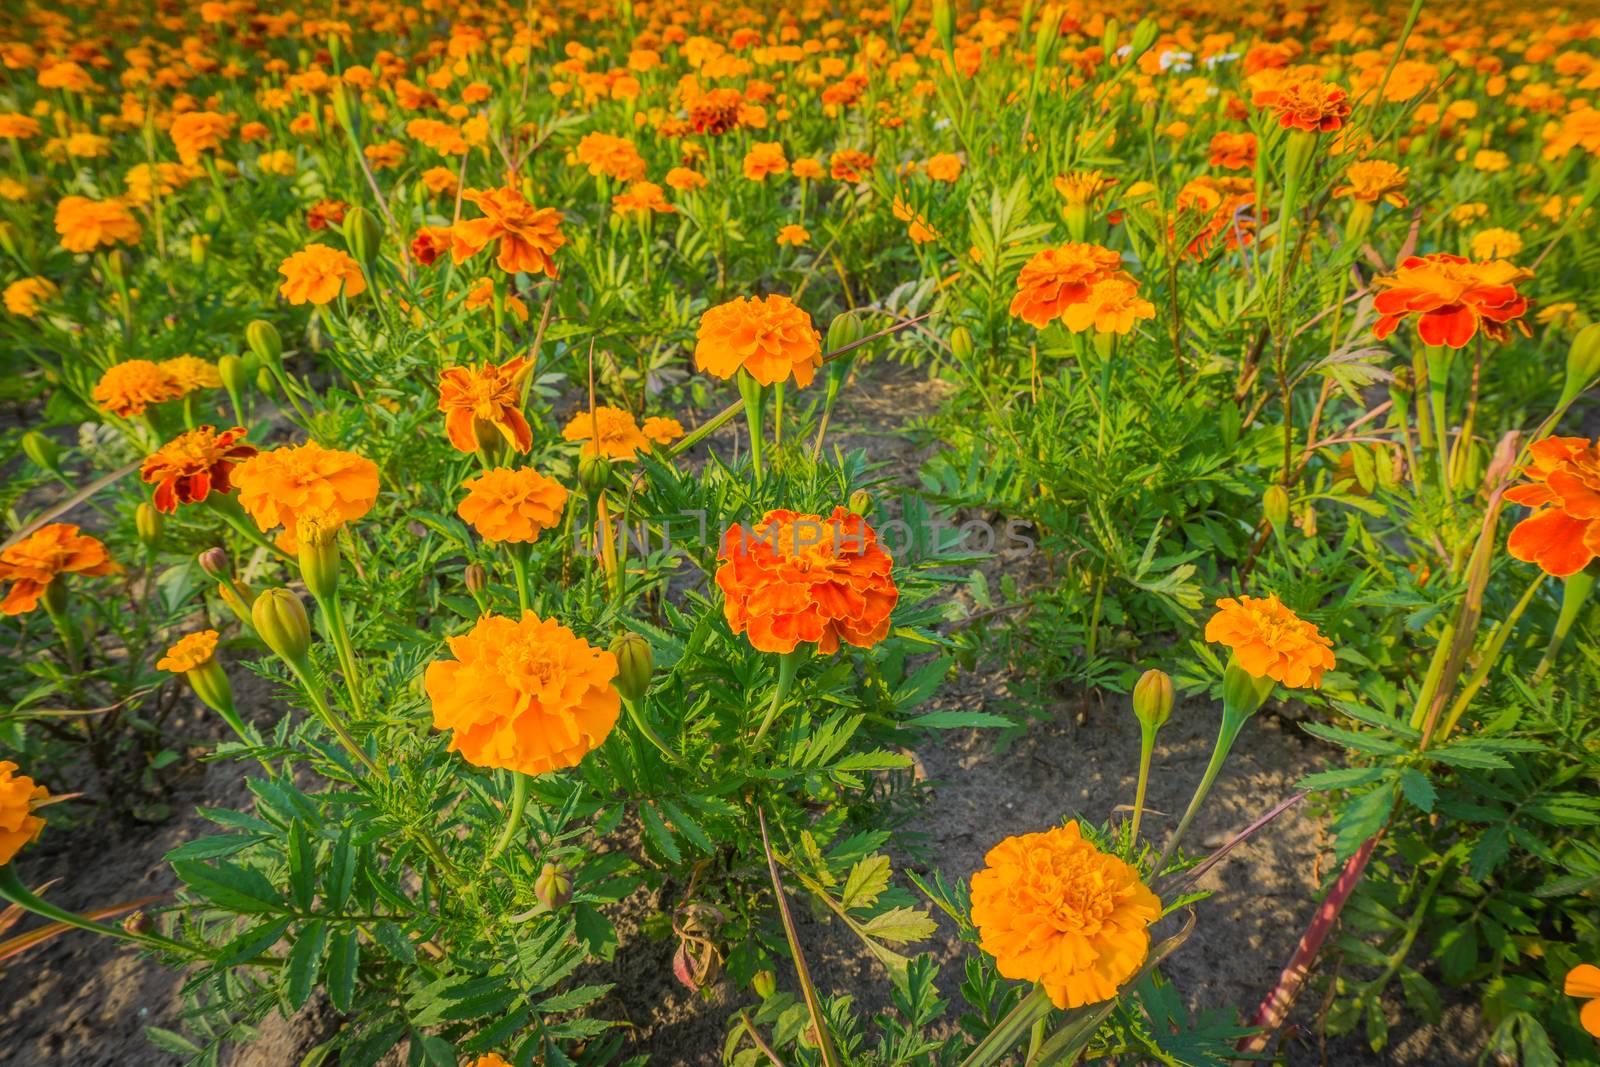 big field of orange and red marigold flowers in close up